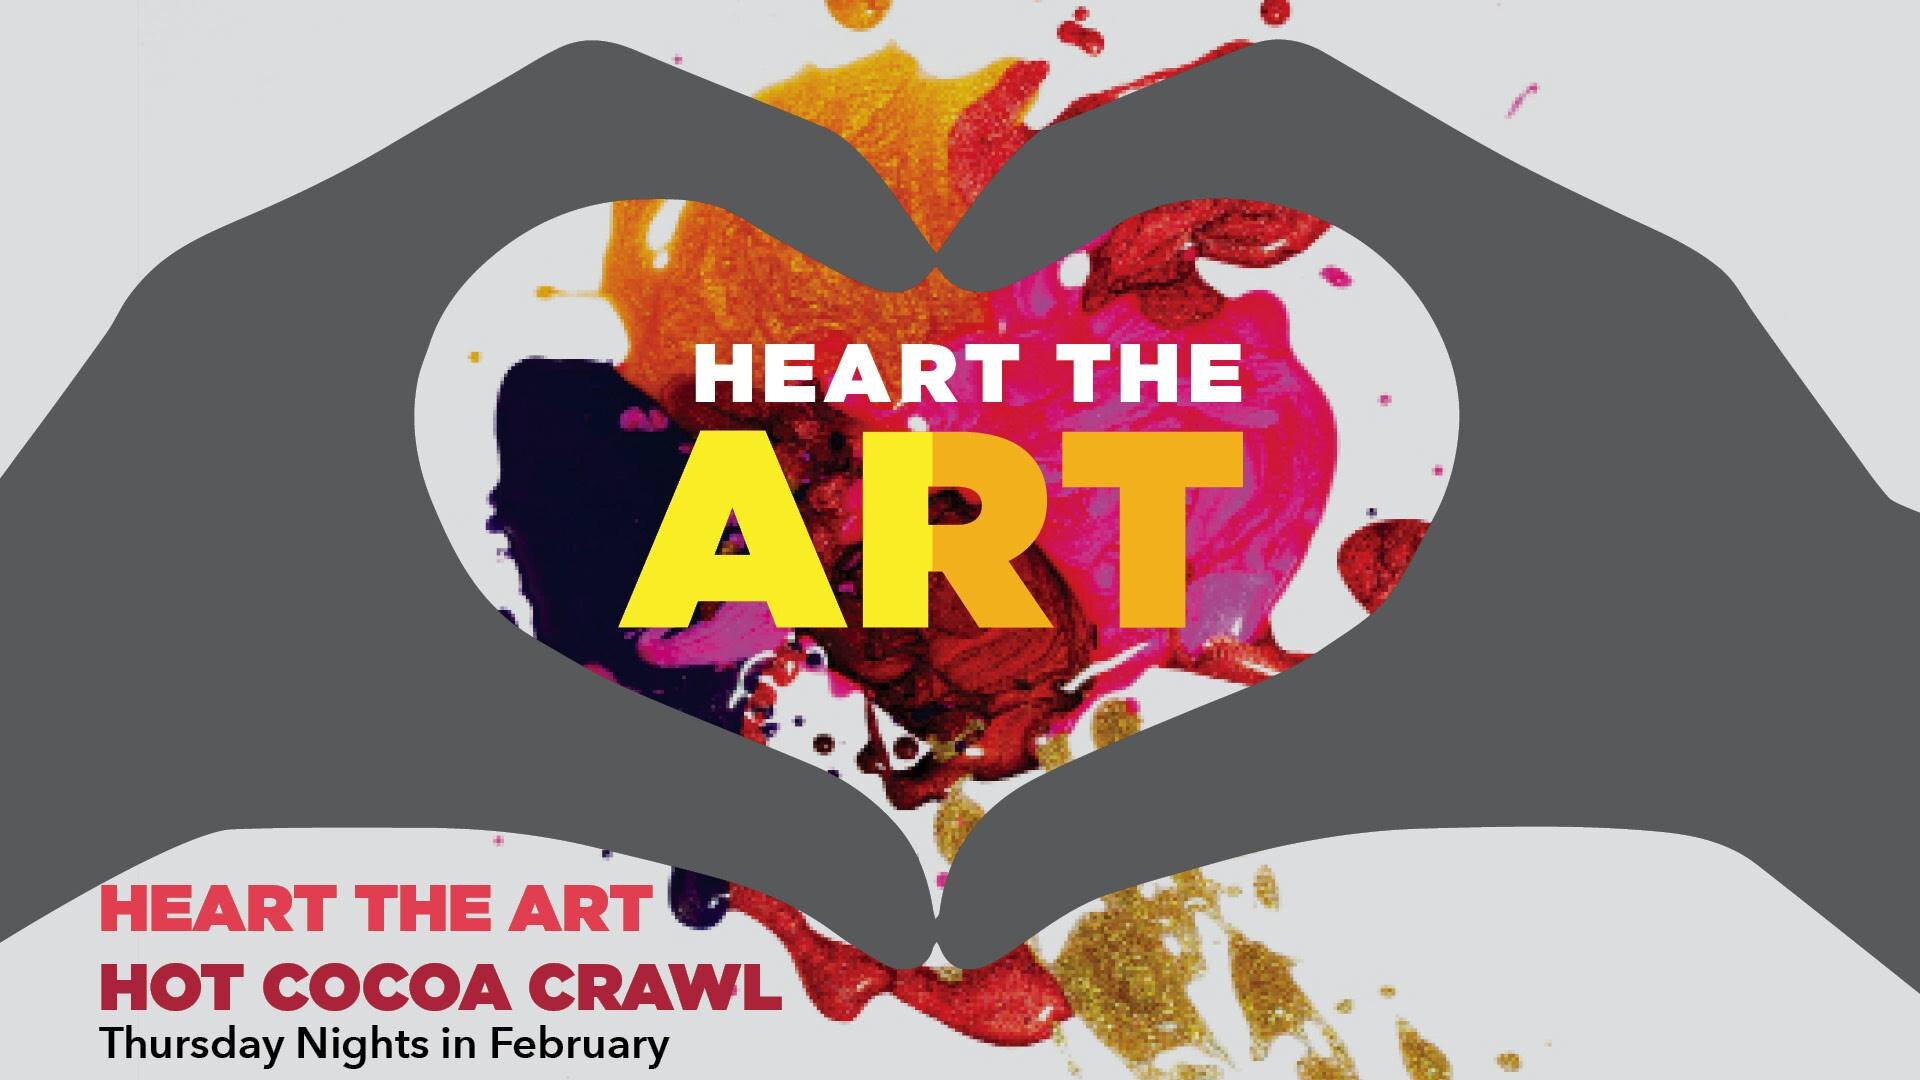 Farmington has transformed the second annual Heart the Art into a month-long strolling tour of downtown.